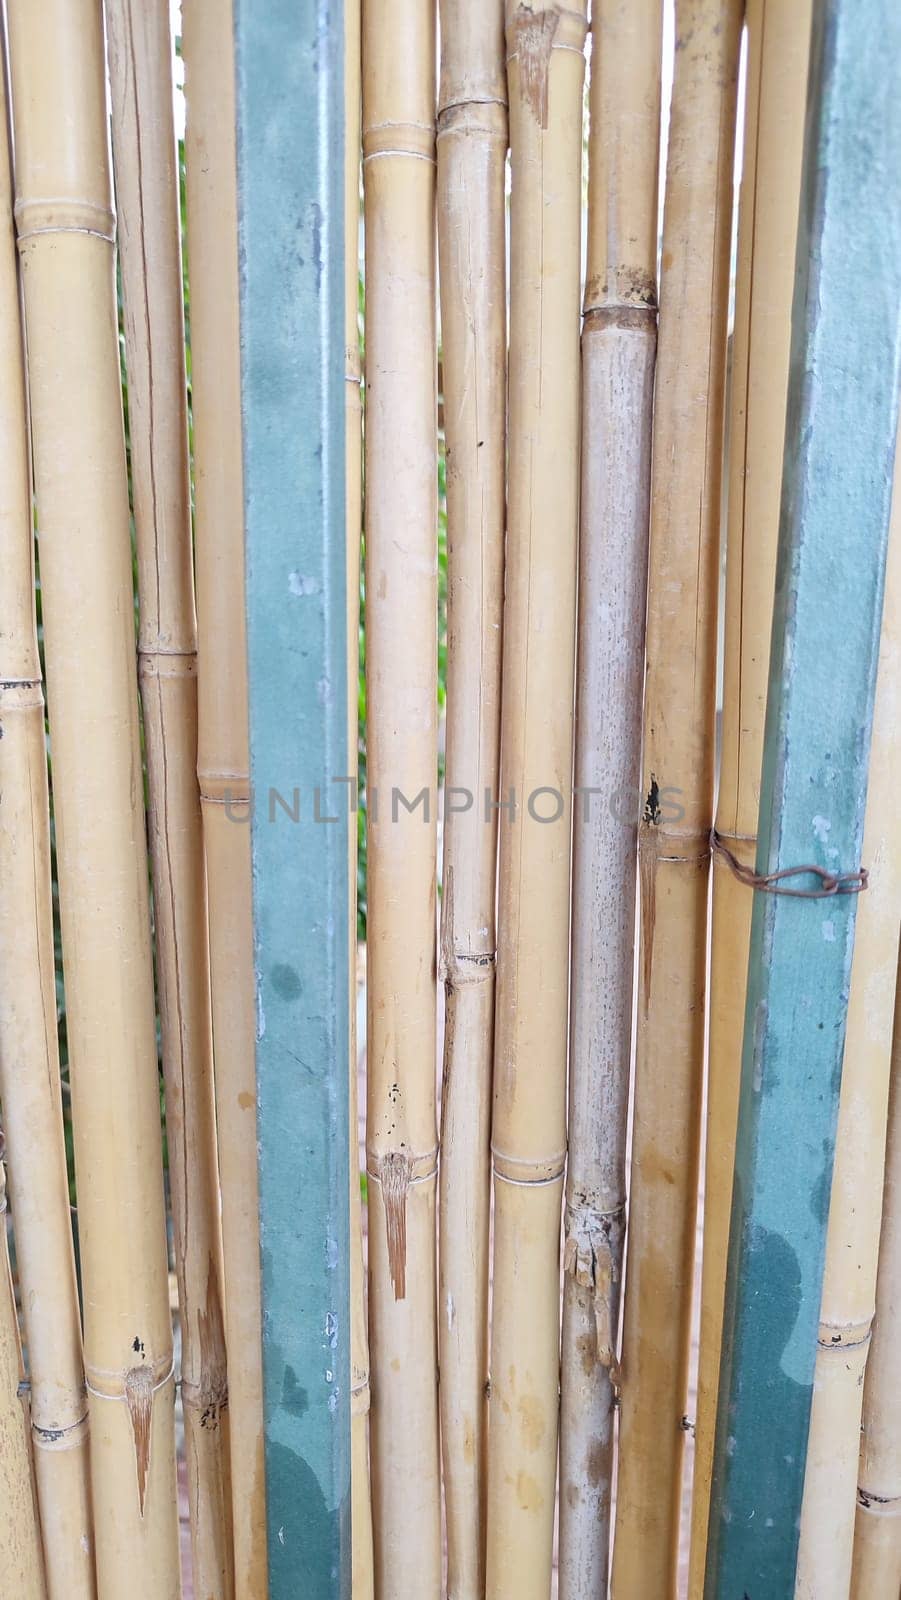 outdoor fence made of bamboo and metal, objects by Ply